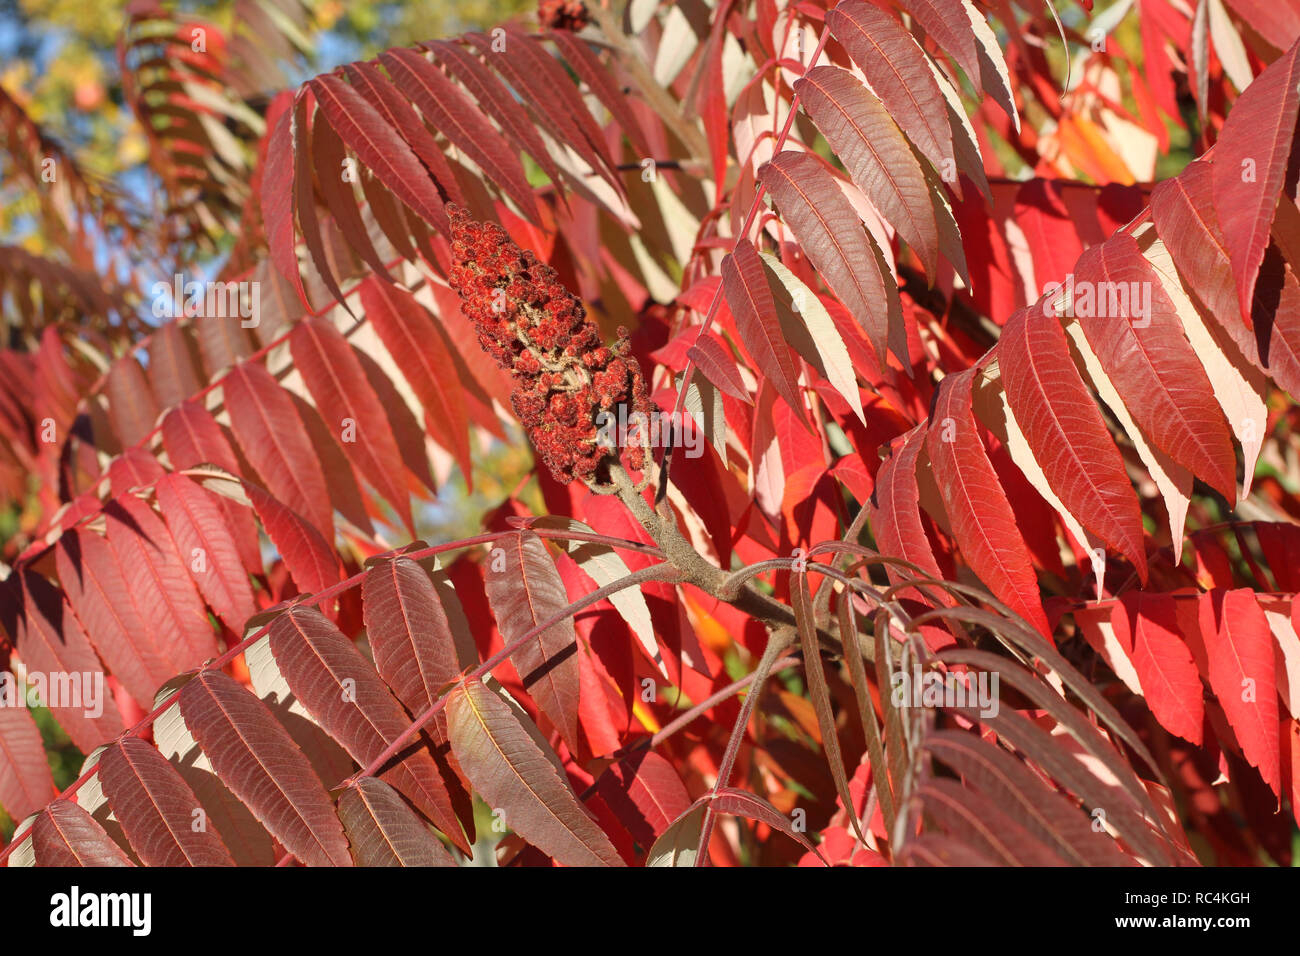 Autumn - red leaves on sumac tree against blue sky Stock Photo